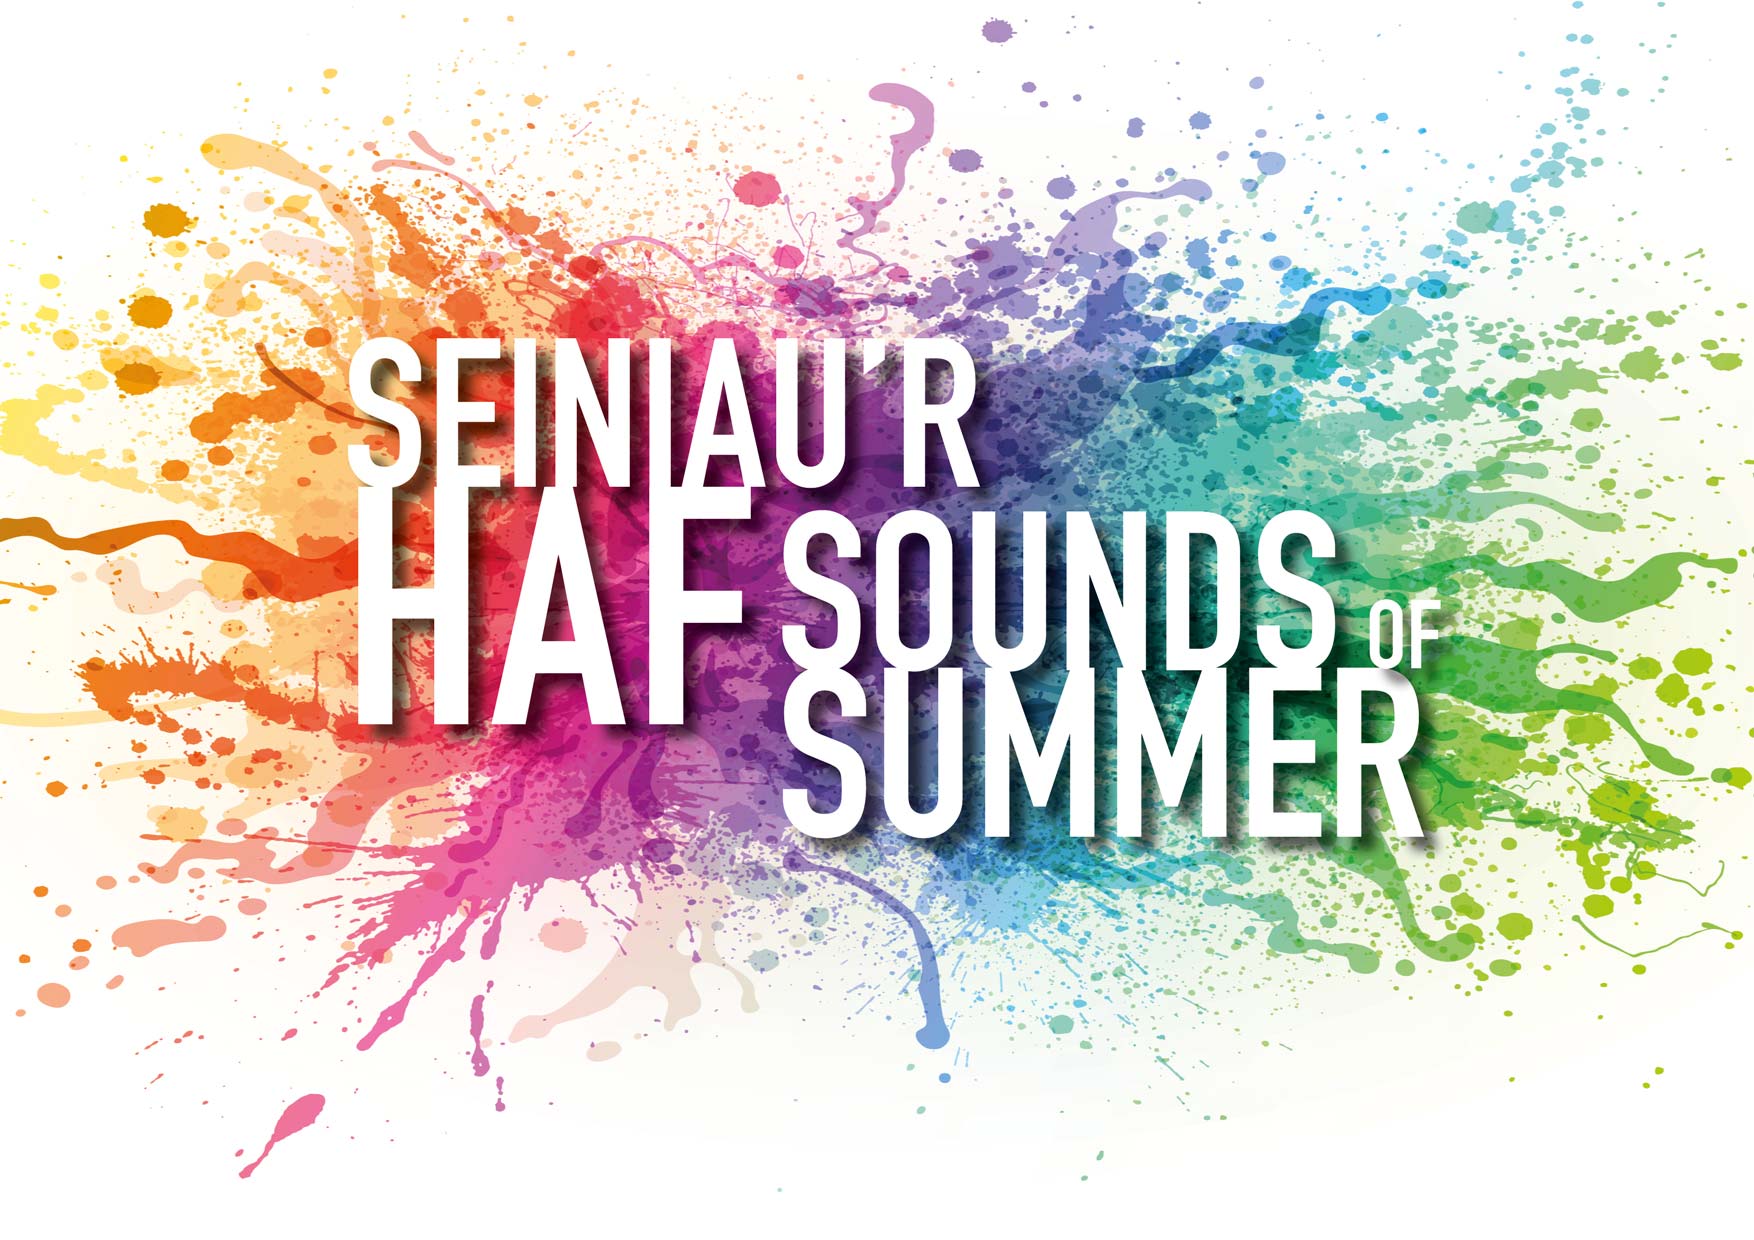 pic: Sounds of Summer logo